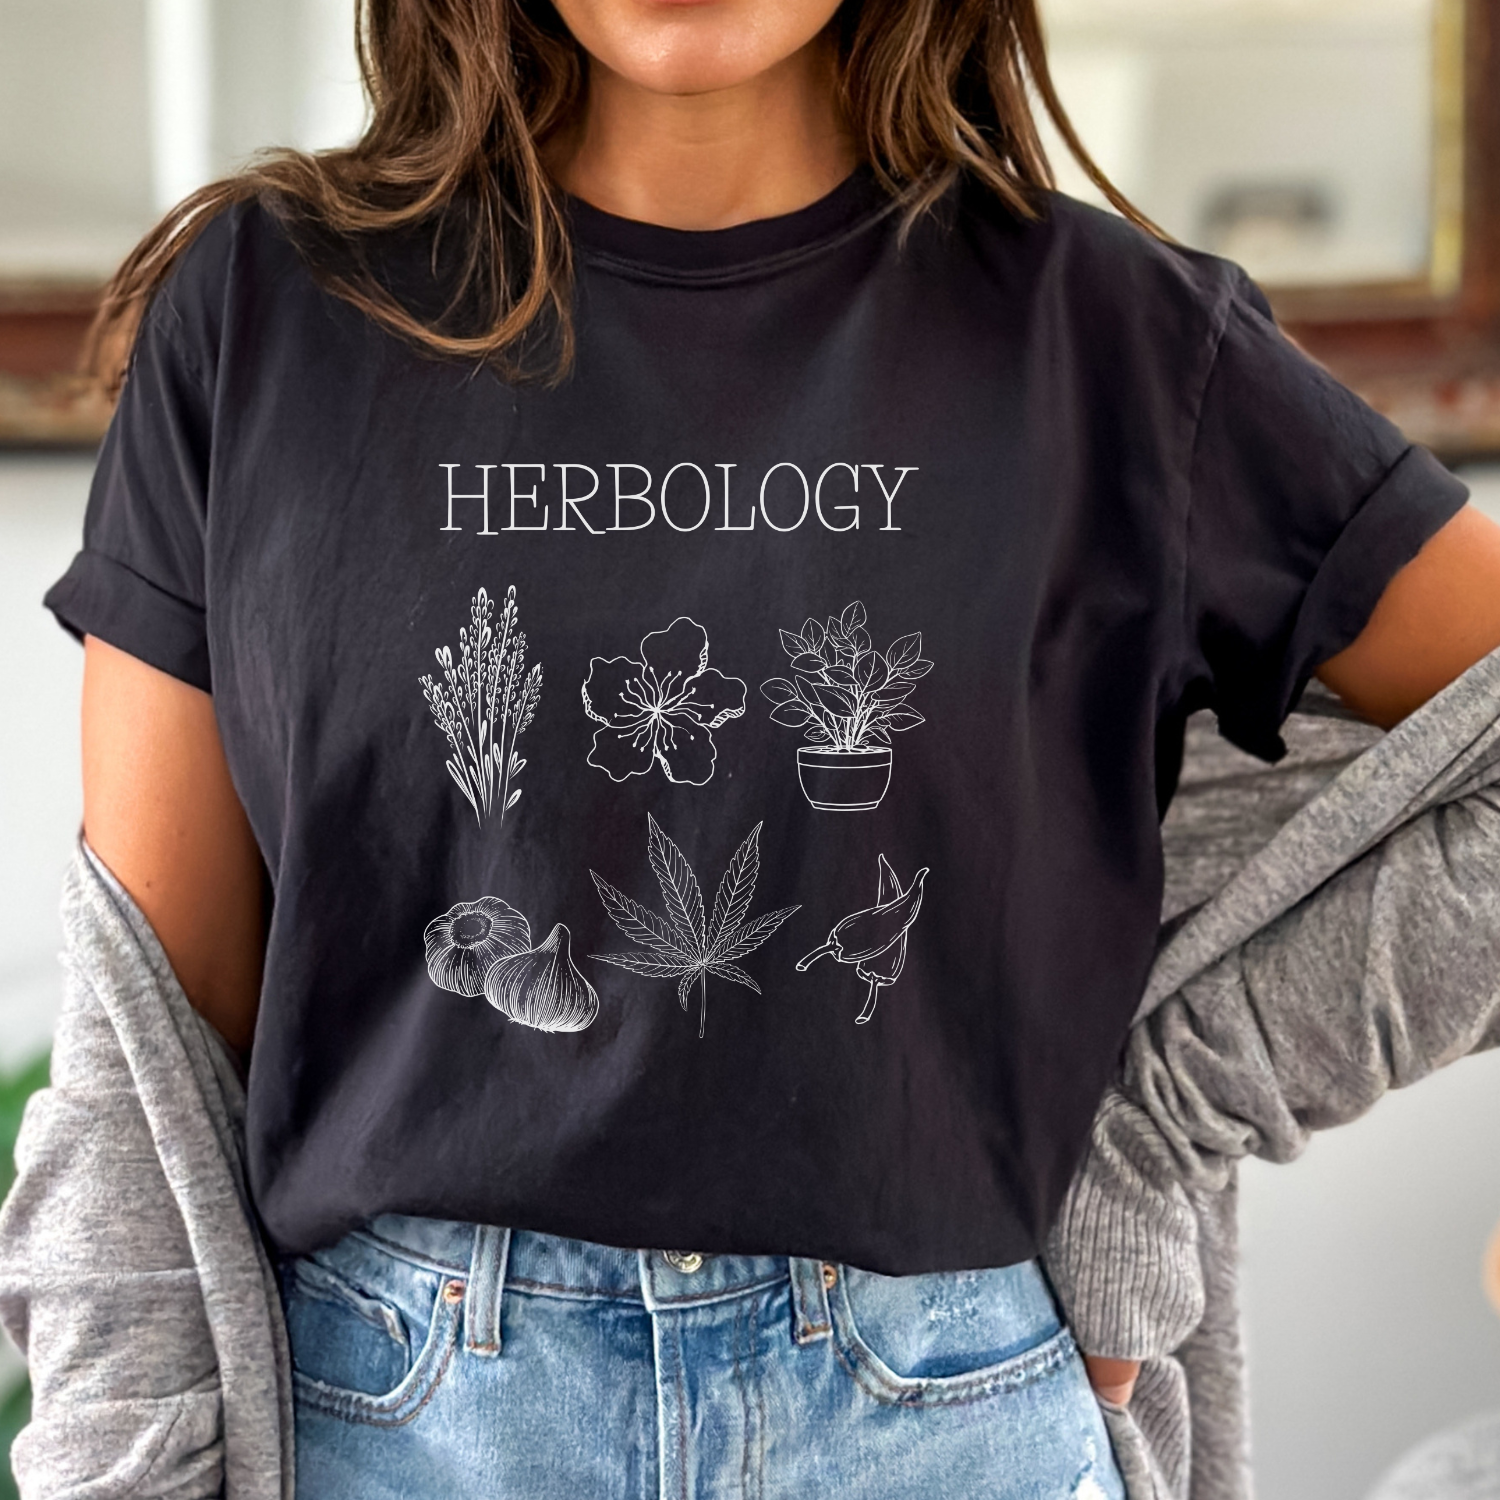 Enchanted plants t-shirt inspired by Herbology class at hogwarts. Perfect for any witch or wizard with a green thumb, color is black.